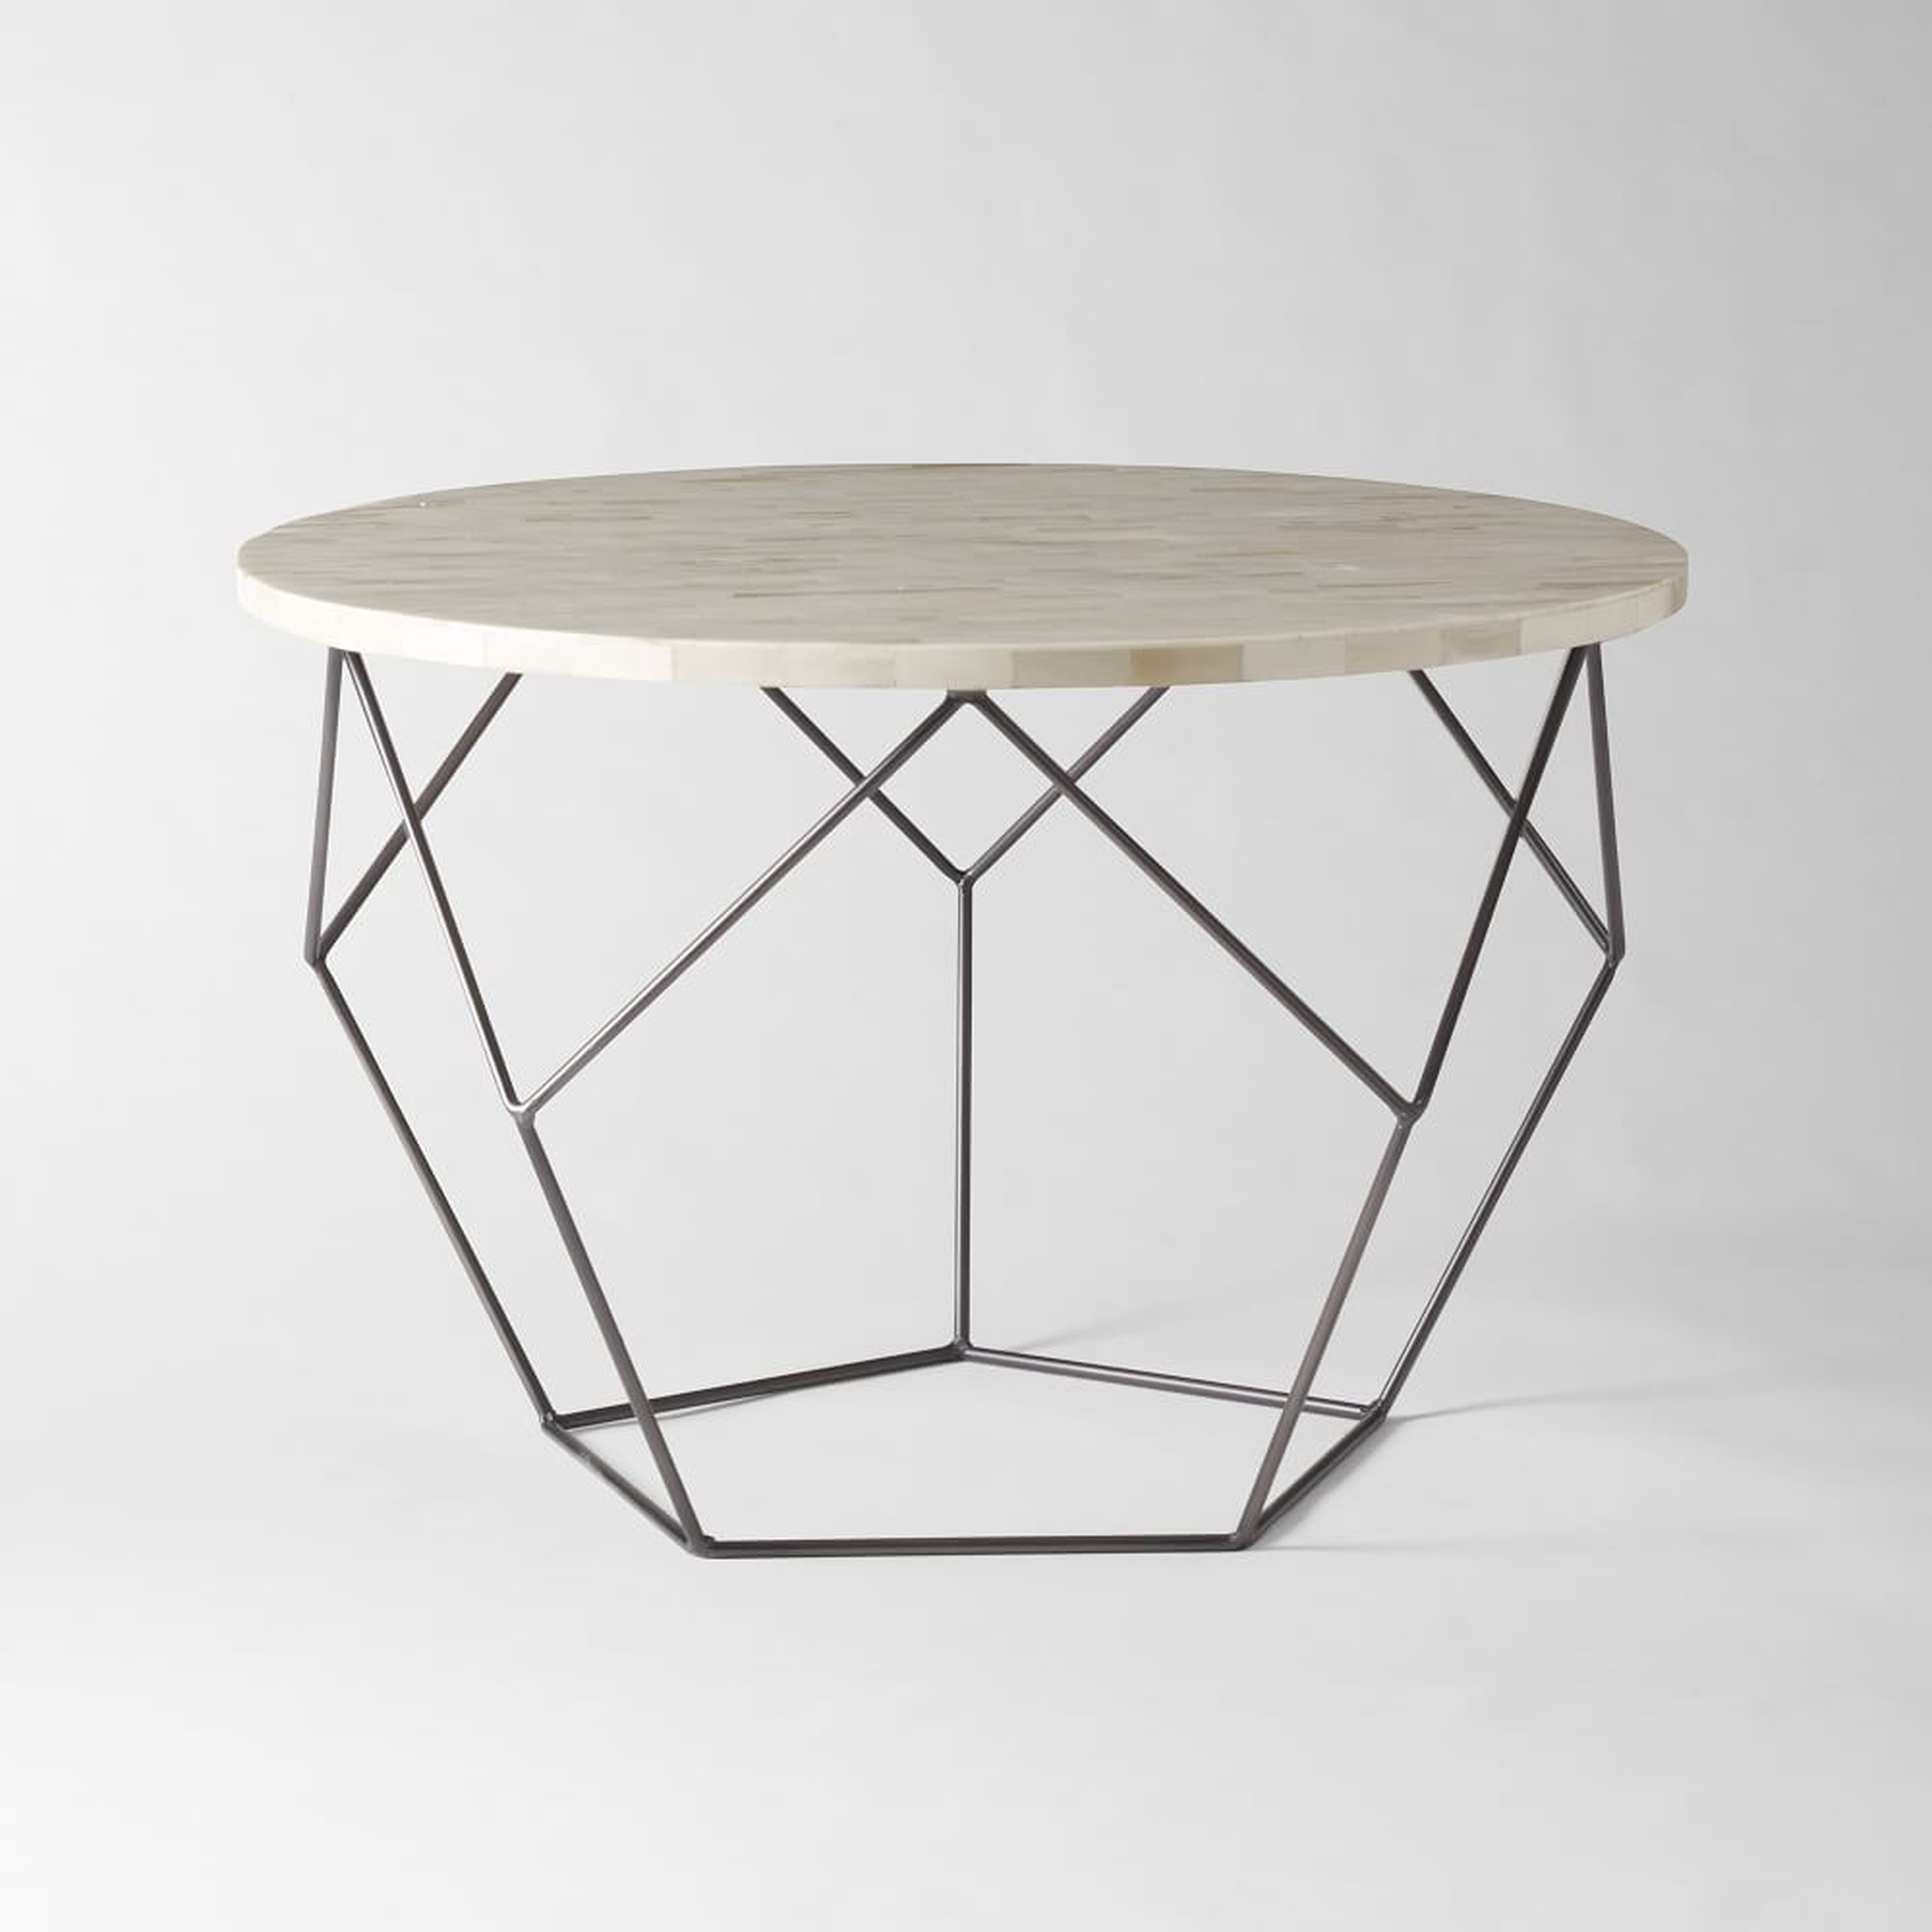 Origami Coffee Table, 28"x18" - West Elm